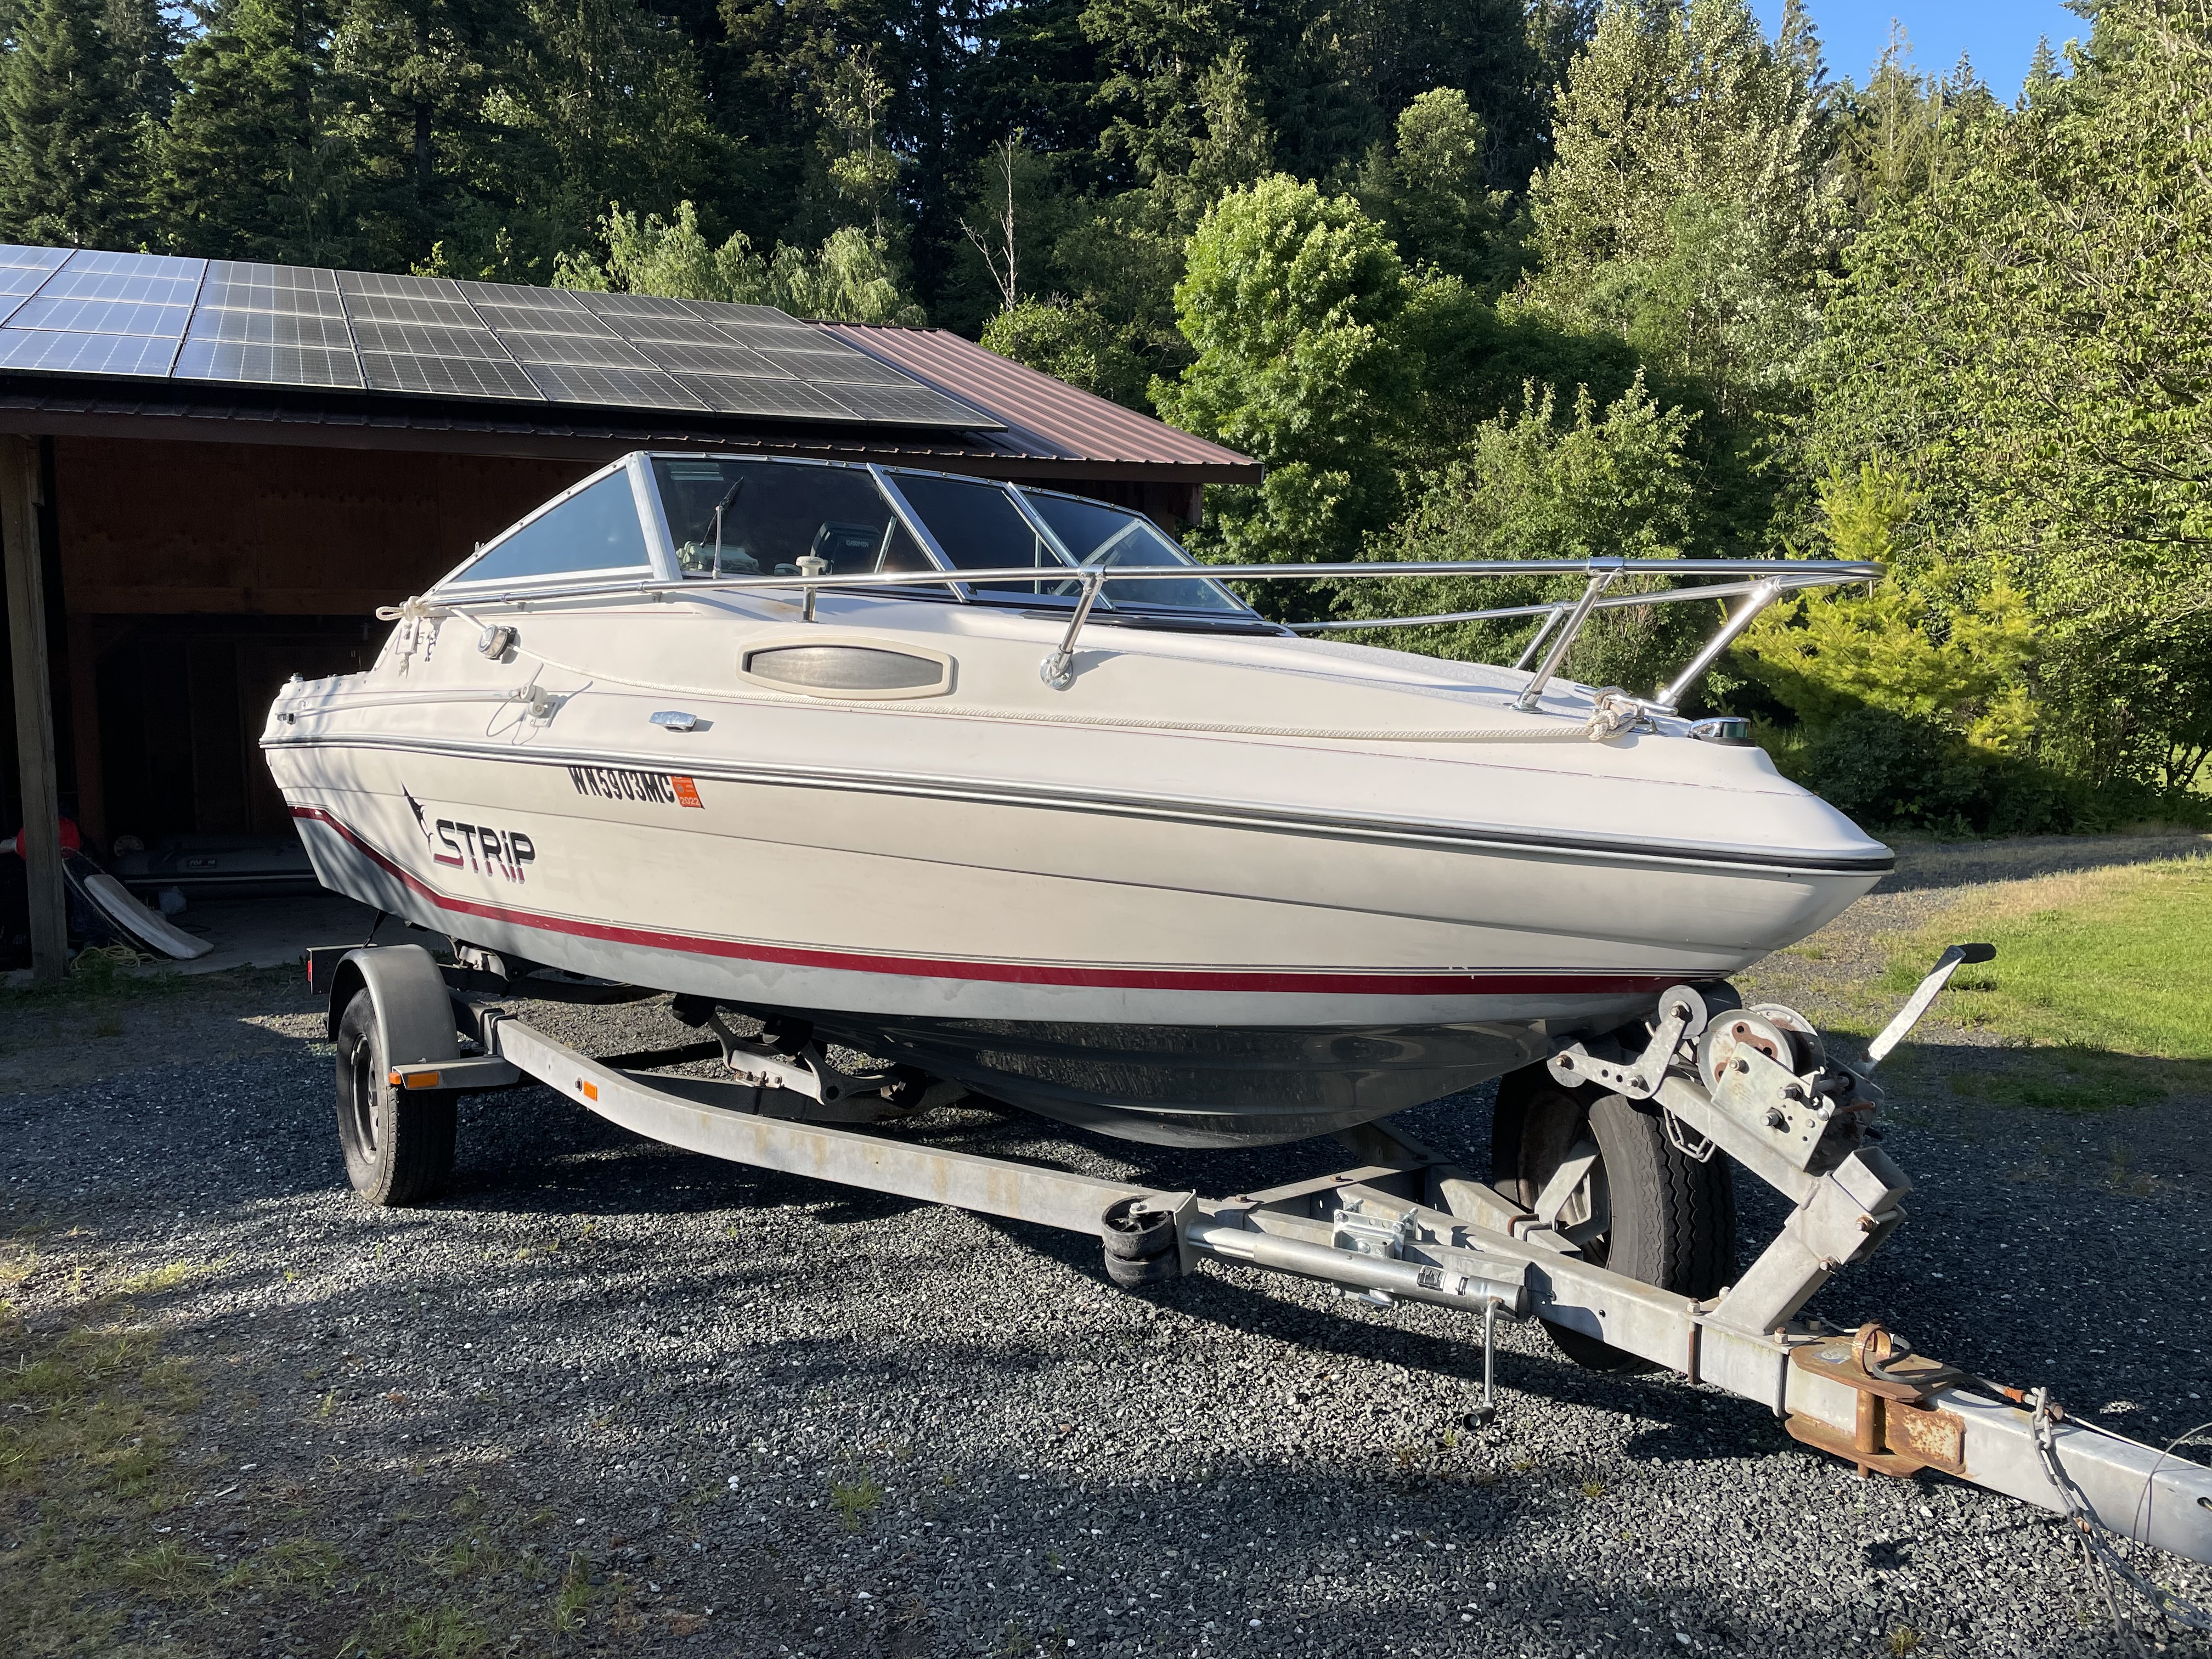 1992 19 foot Other Sea Swirl Striper Fishing boat for sale in Deming, WA - image 1 